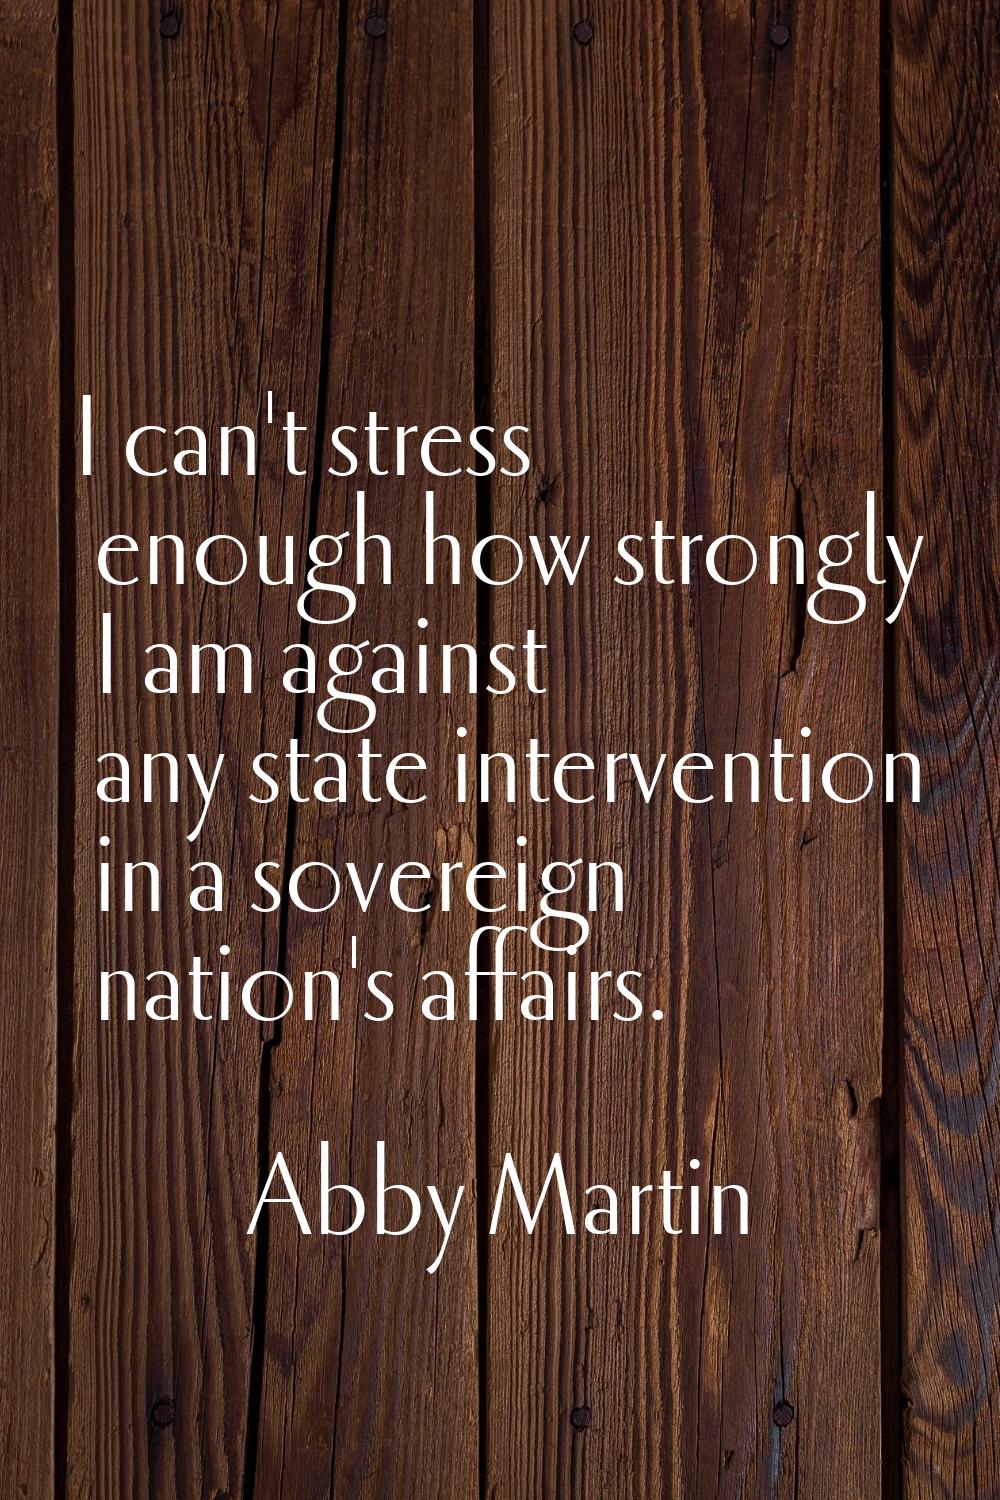 I can't stress enough how strongly I am against any state intervention in a sovereign nation's affa